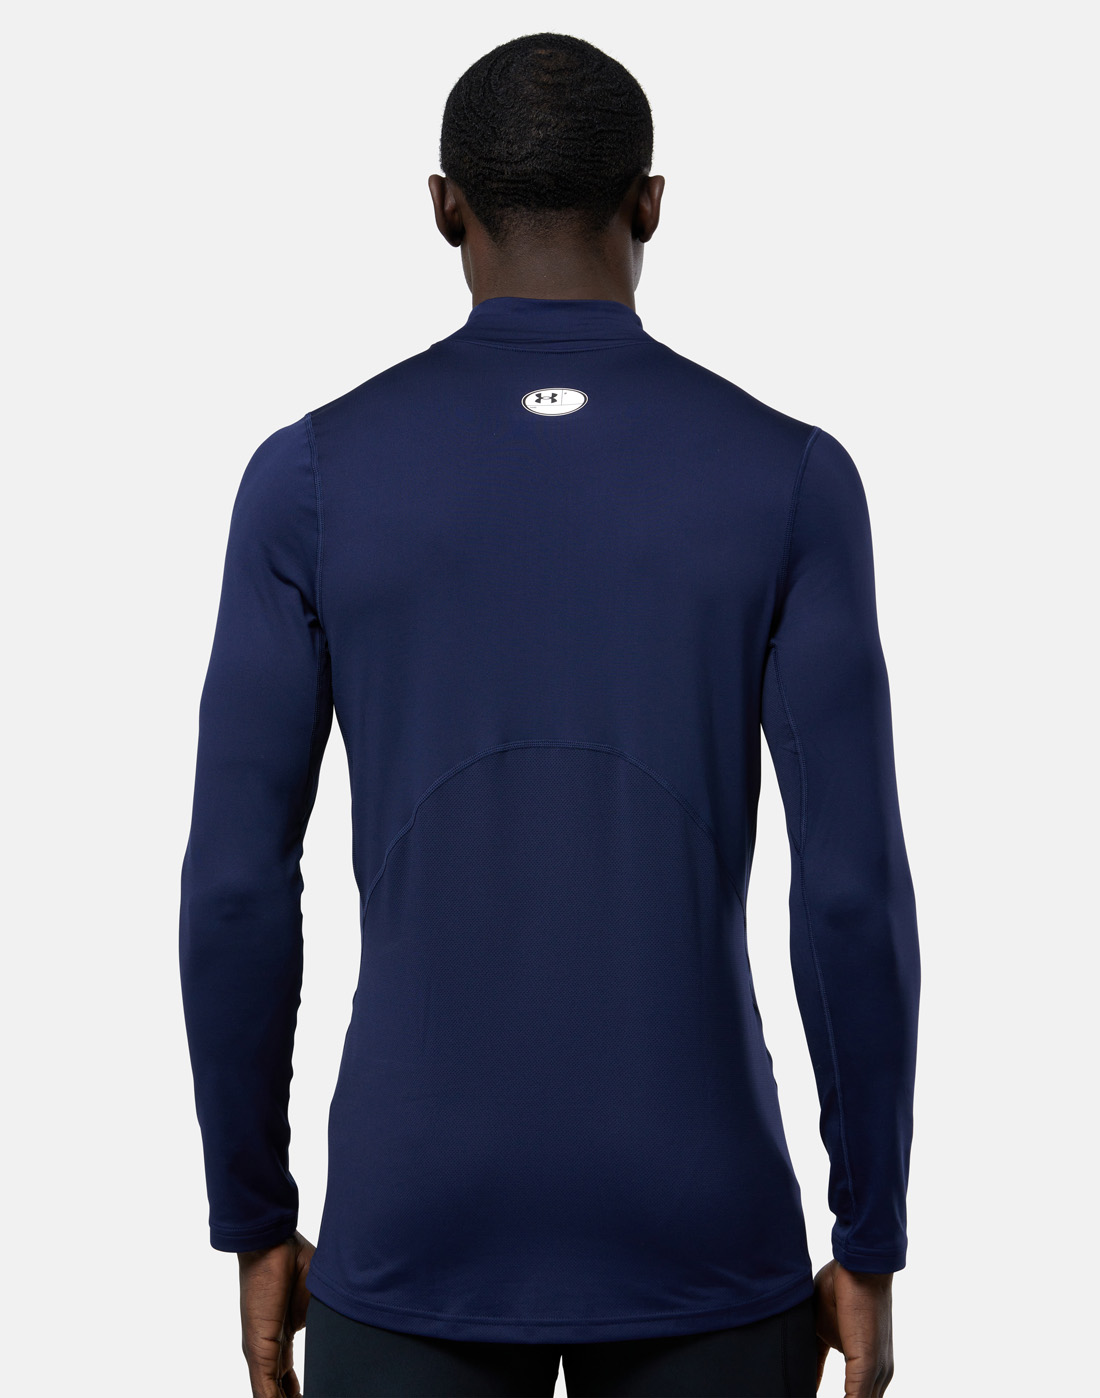 Under Armour Mens ColdGear Armour Fitted Mock Top - Navy